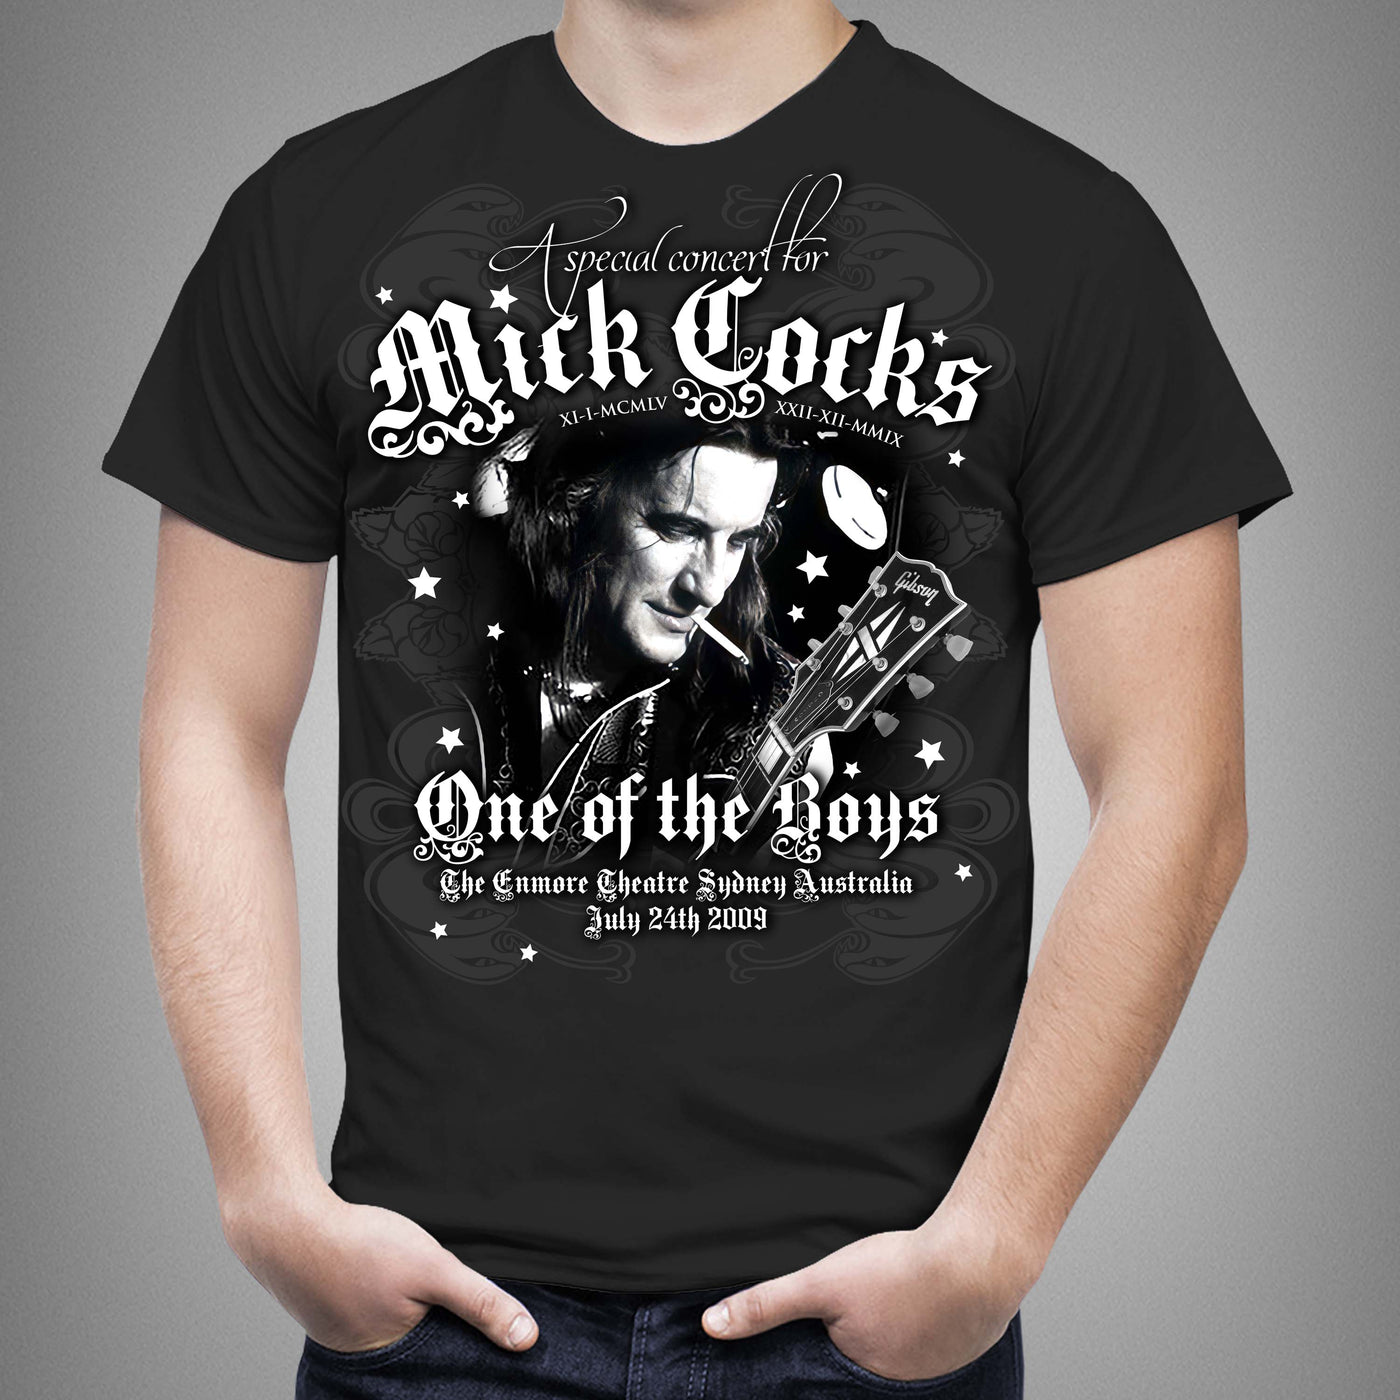 Mick Cocks Tribute Concert - Special Edition GR